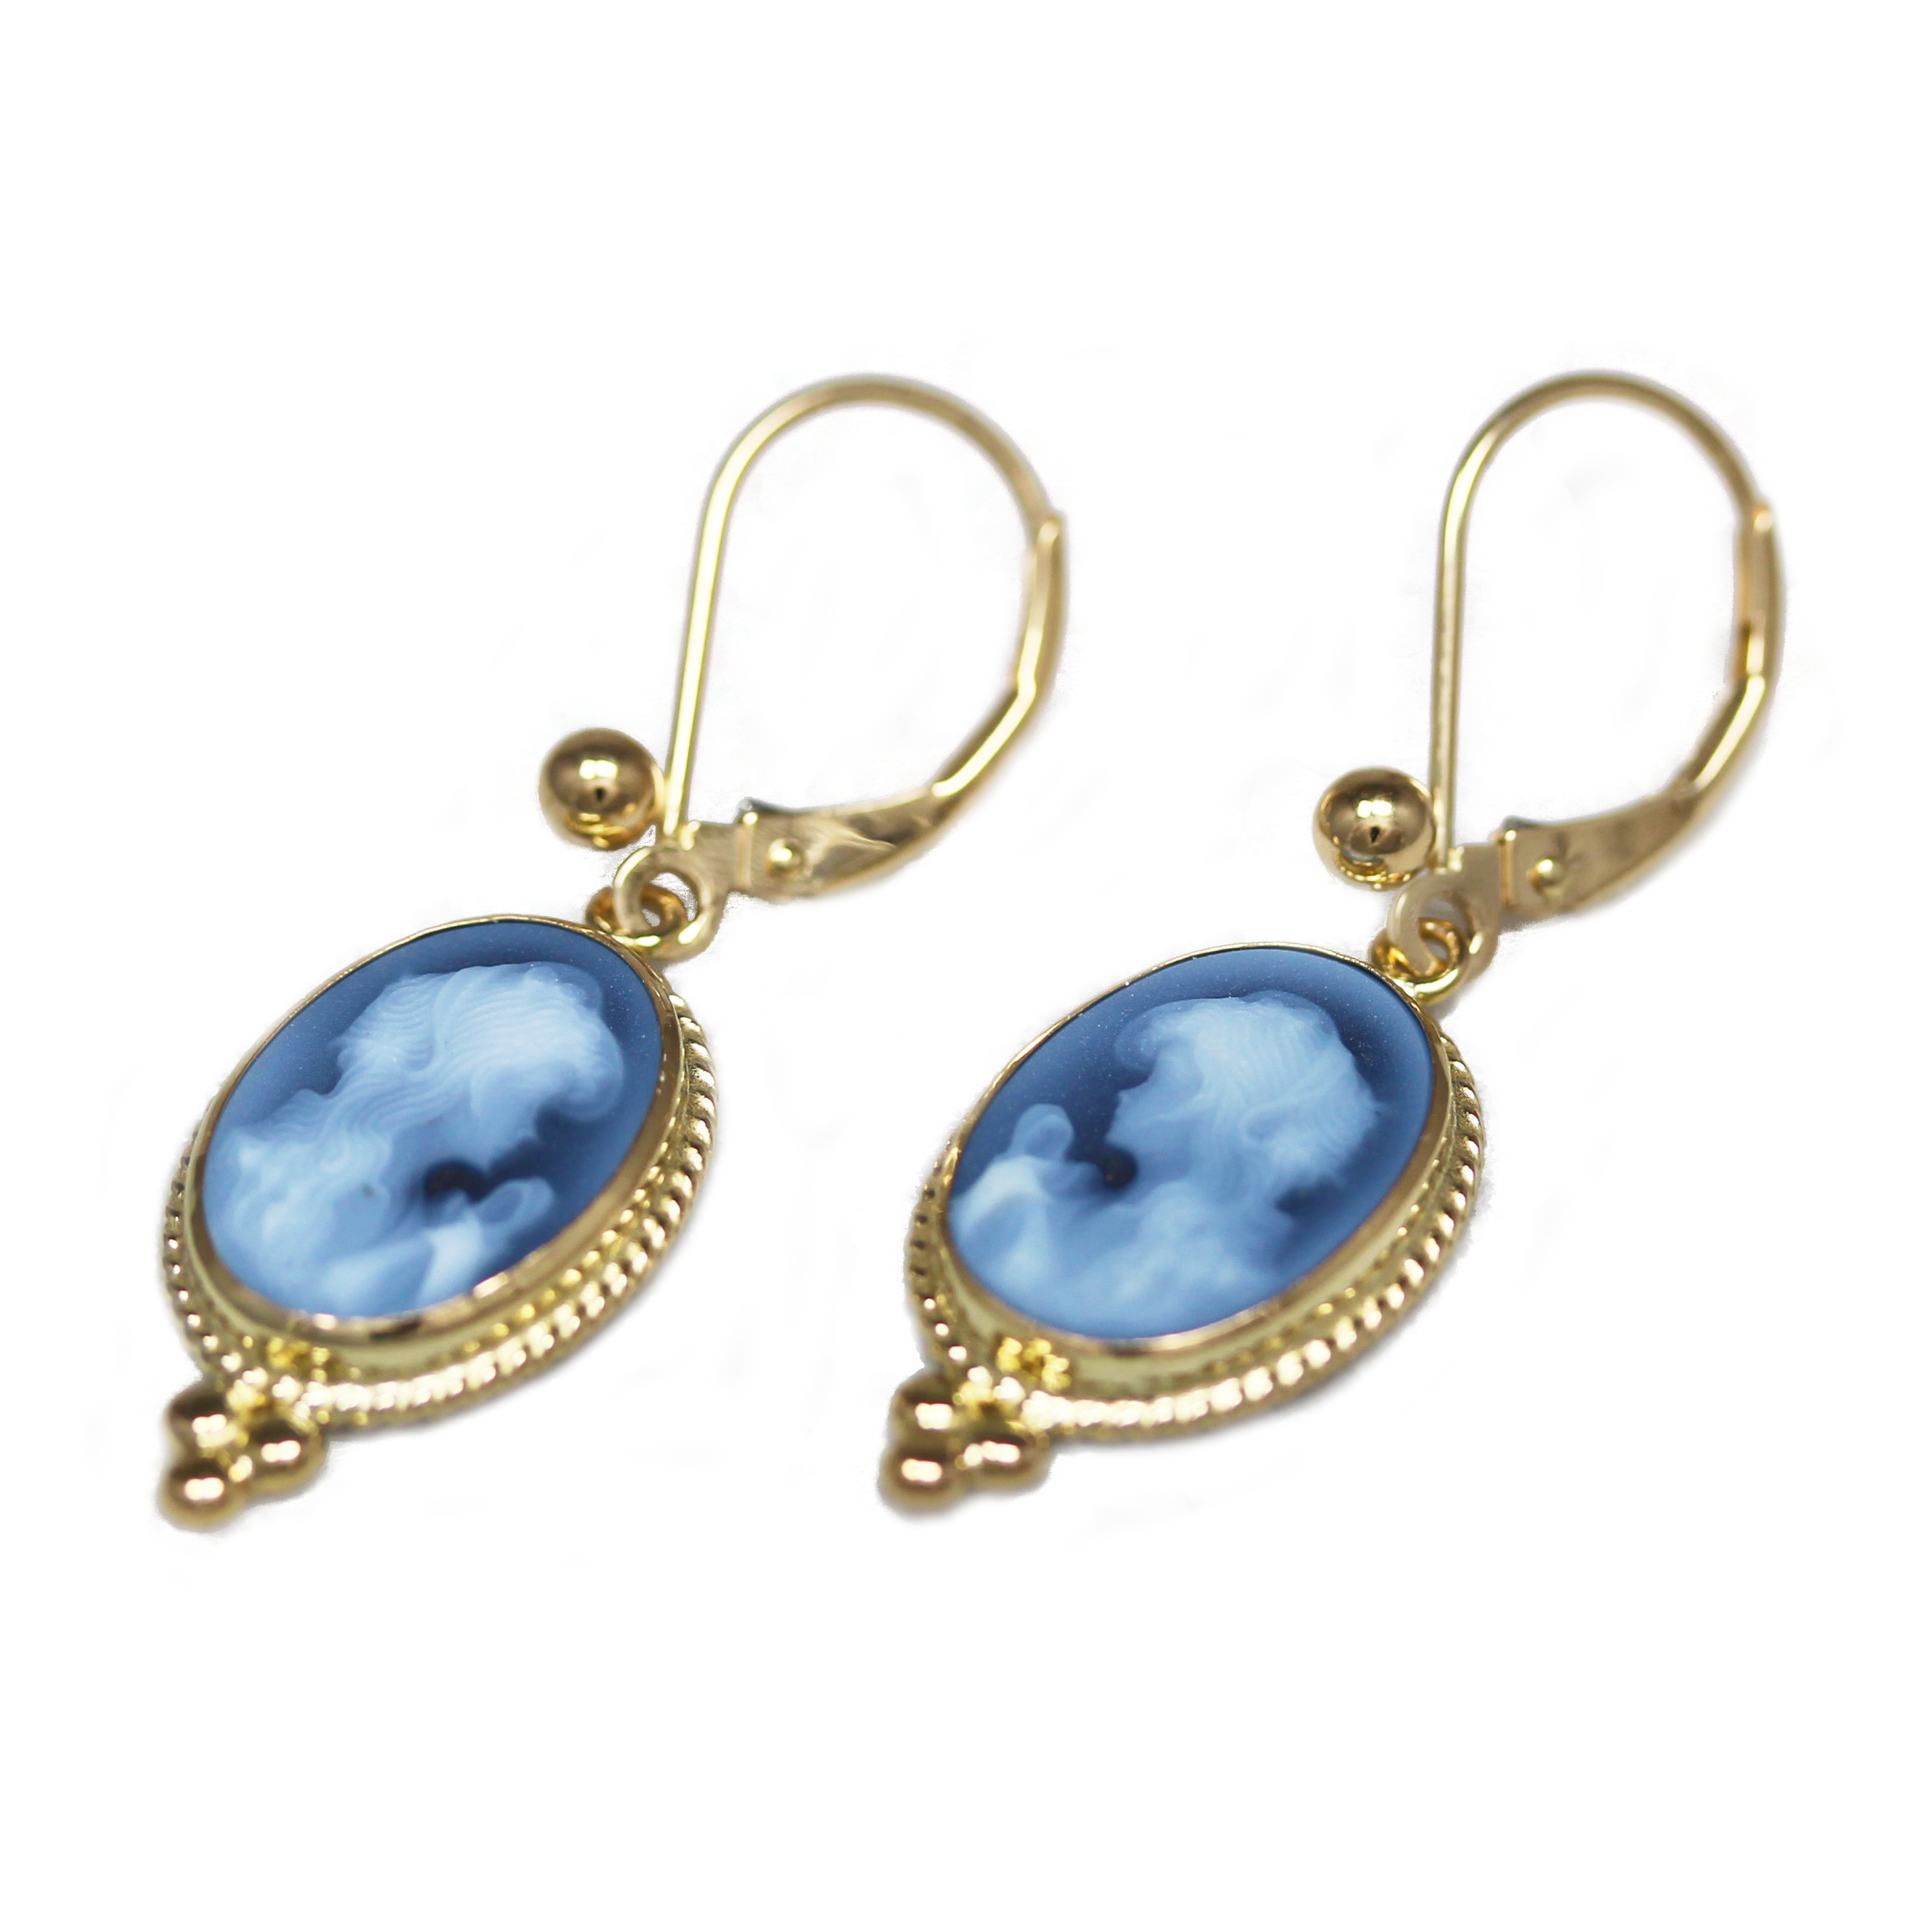 blue cameo and yellow gold earrings on white background